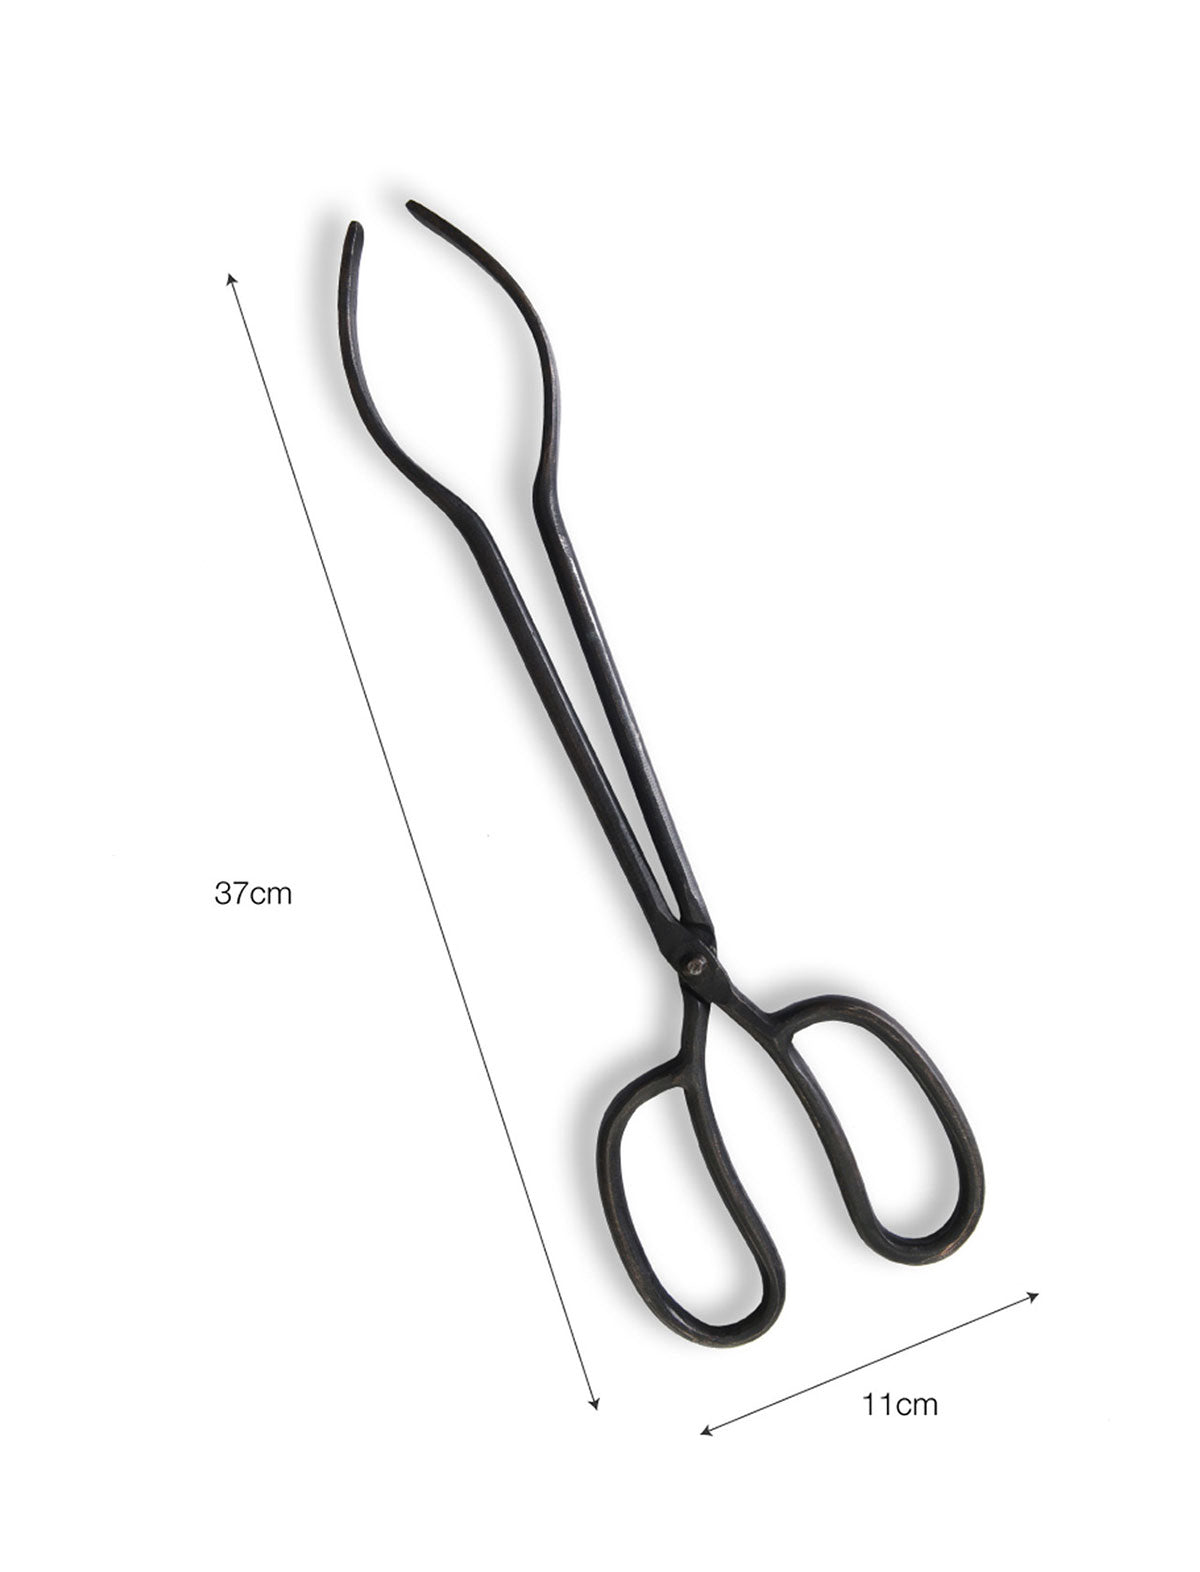 Garden Trading Coal Tongs dimensions overview